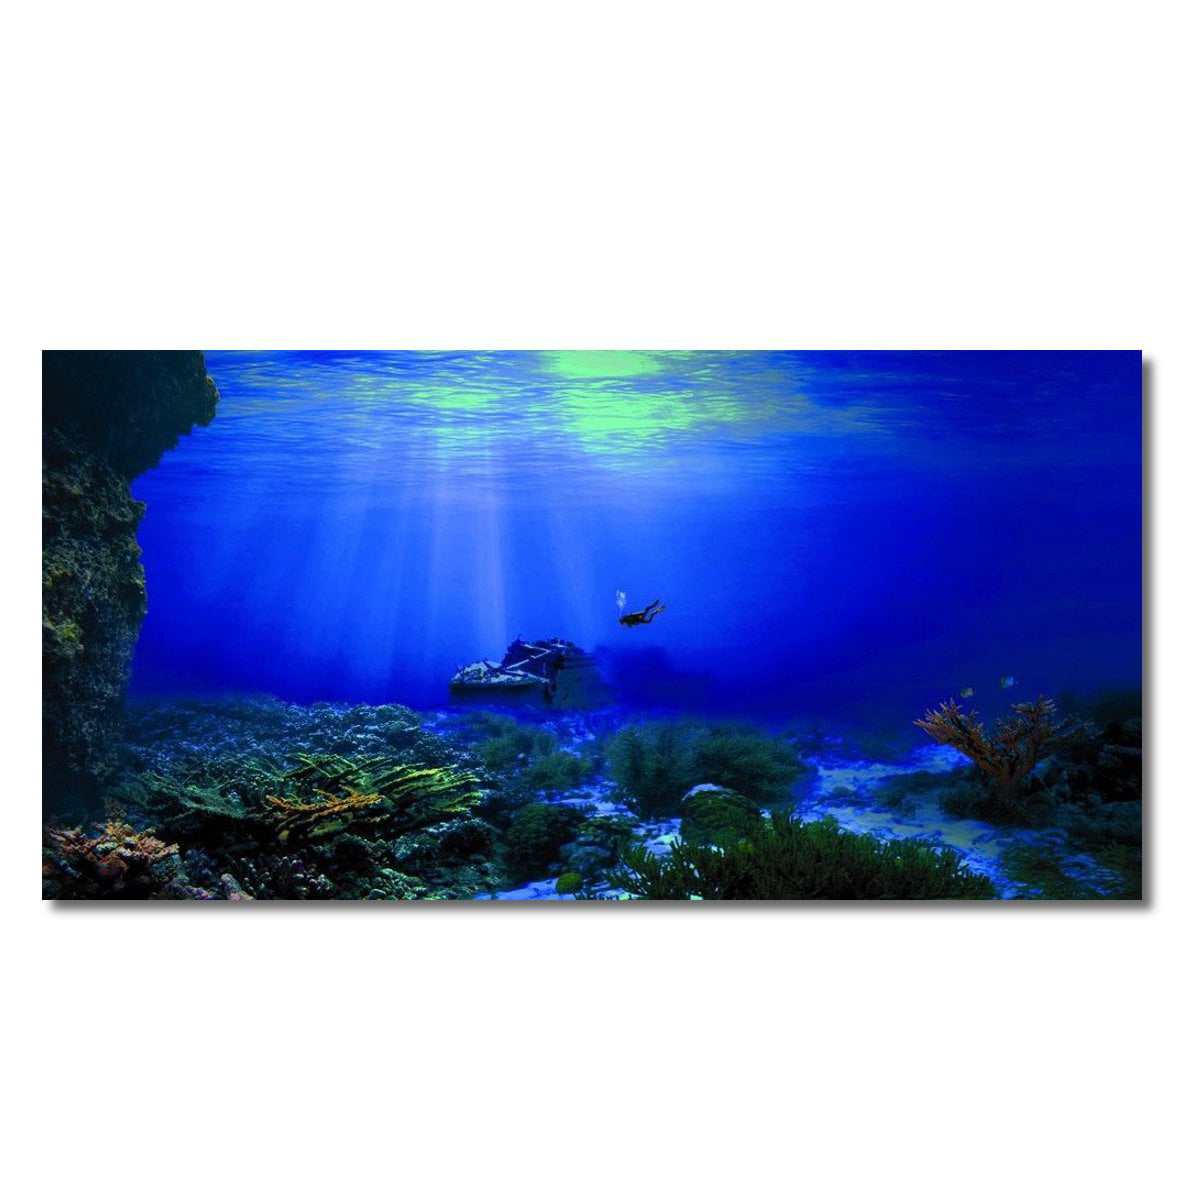 Fantasy Staring Aquarium Background Octopus Sunken Ship Ocean Scenery Fish Tank Wallpaper Easy to Apply and Remove PVC Sticker Pictures Poster Background Decoration 